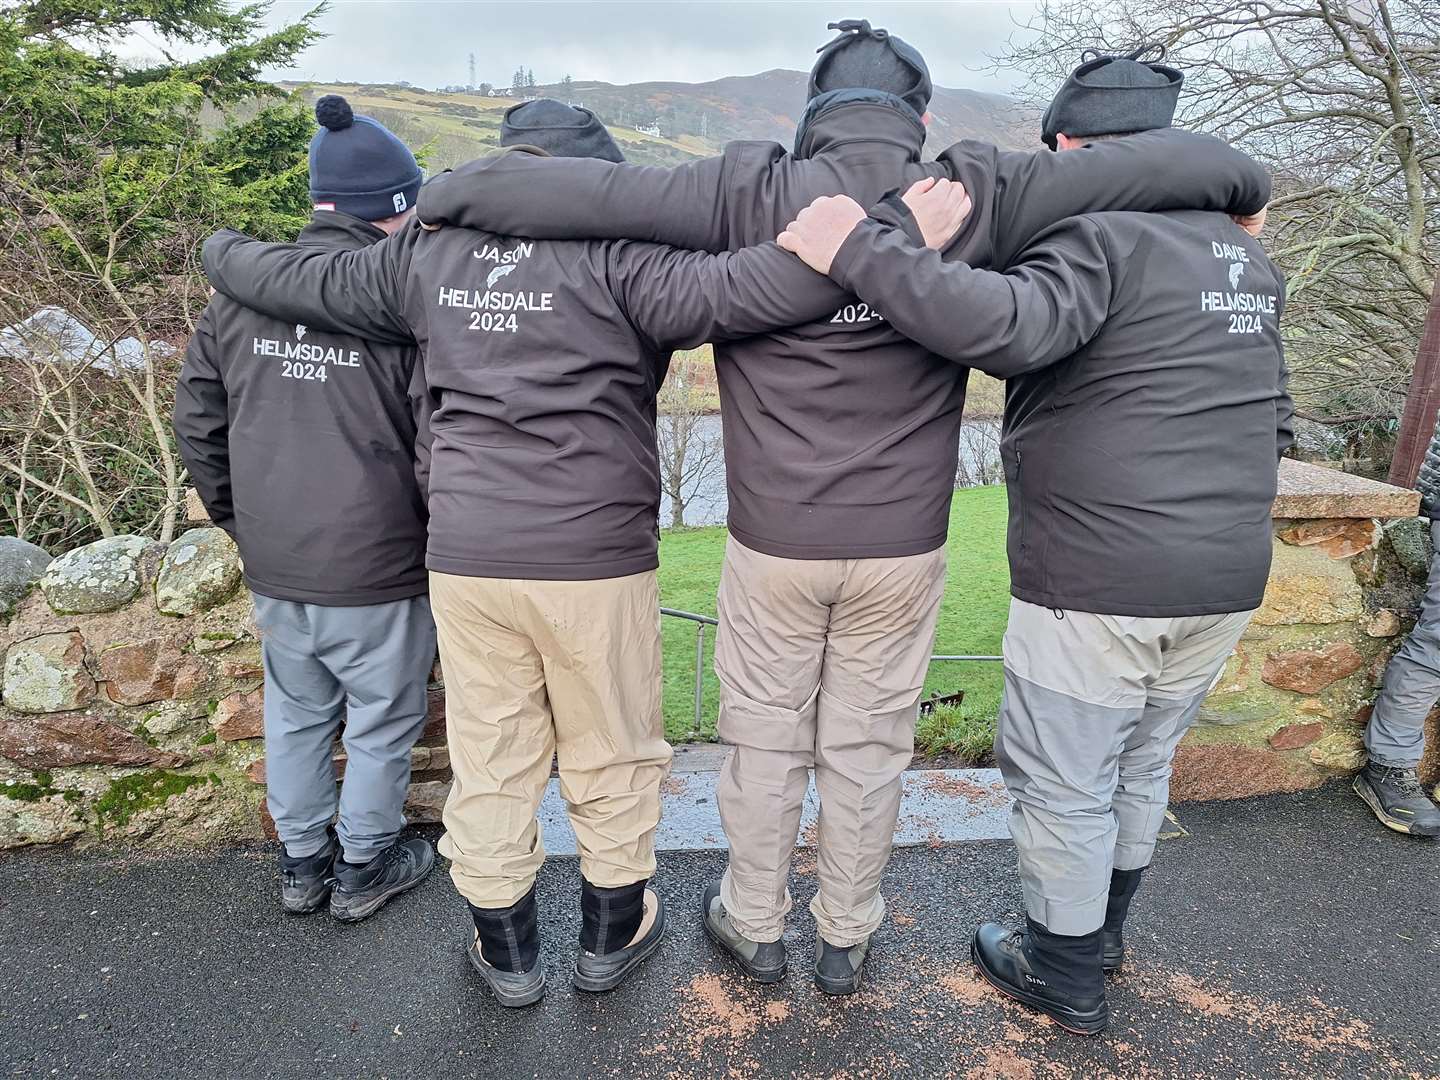 This group of friends from Glasgow are celebrating their tenth year of fishing the Helmsdale. Each year they wear personalised matching jackets and hats with their name, a salmon and 'Helmsdale' printed on them, along with the year.